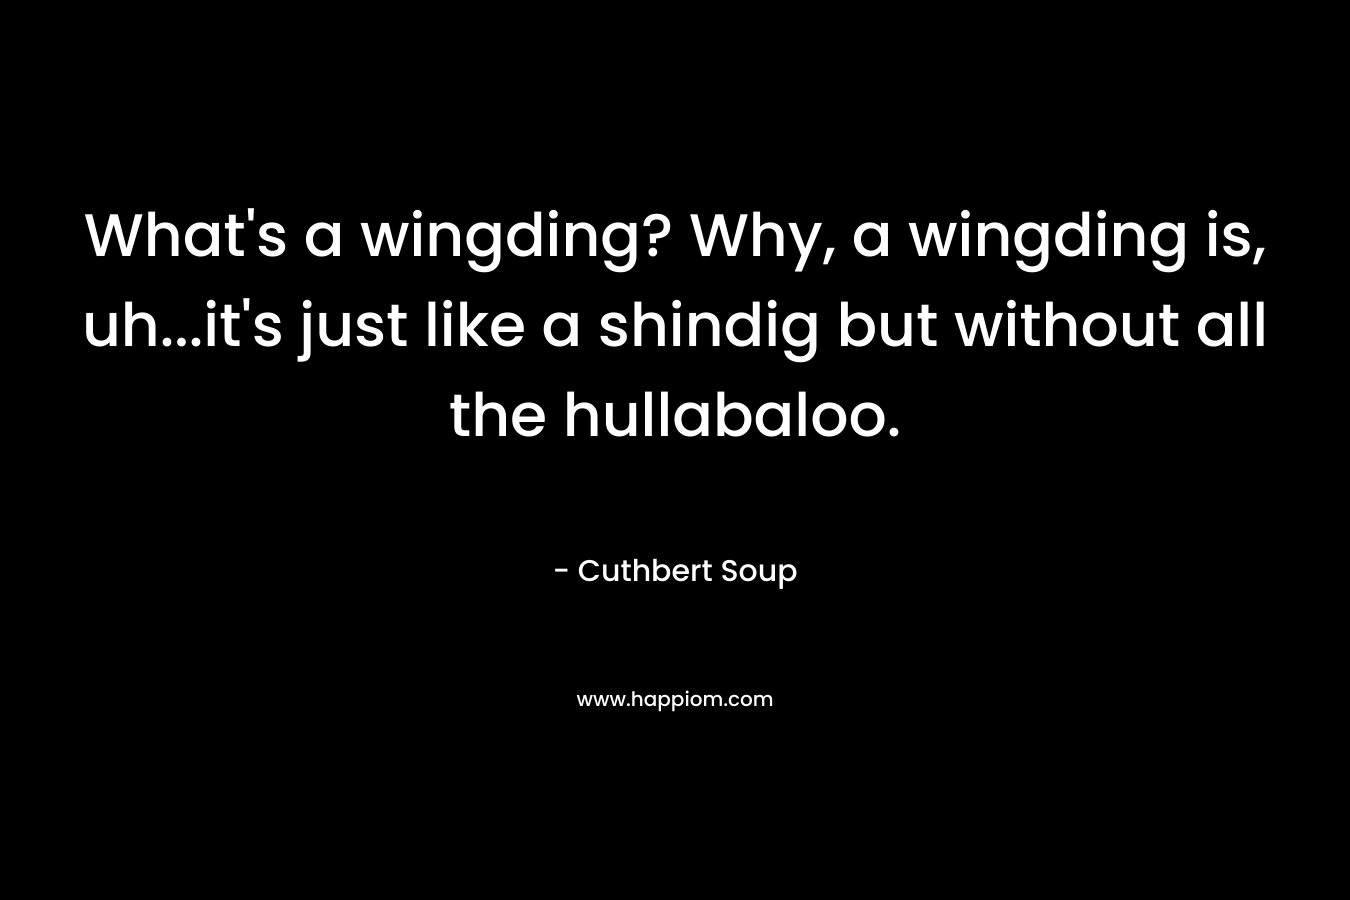 What’s a wingding? Why, a wingding is, uh…it’s just like a shindig but without all the hullabaloo. – Cuthbert Soup